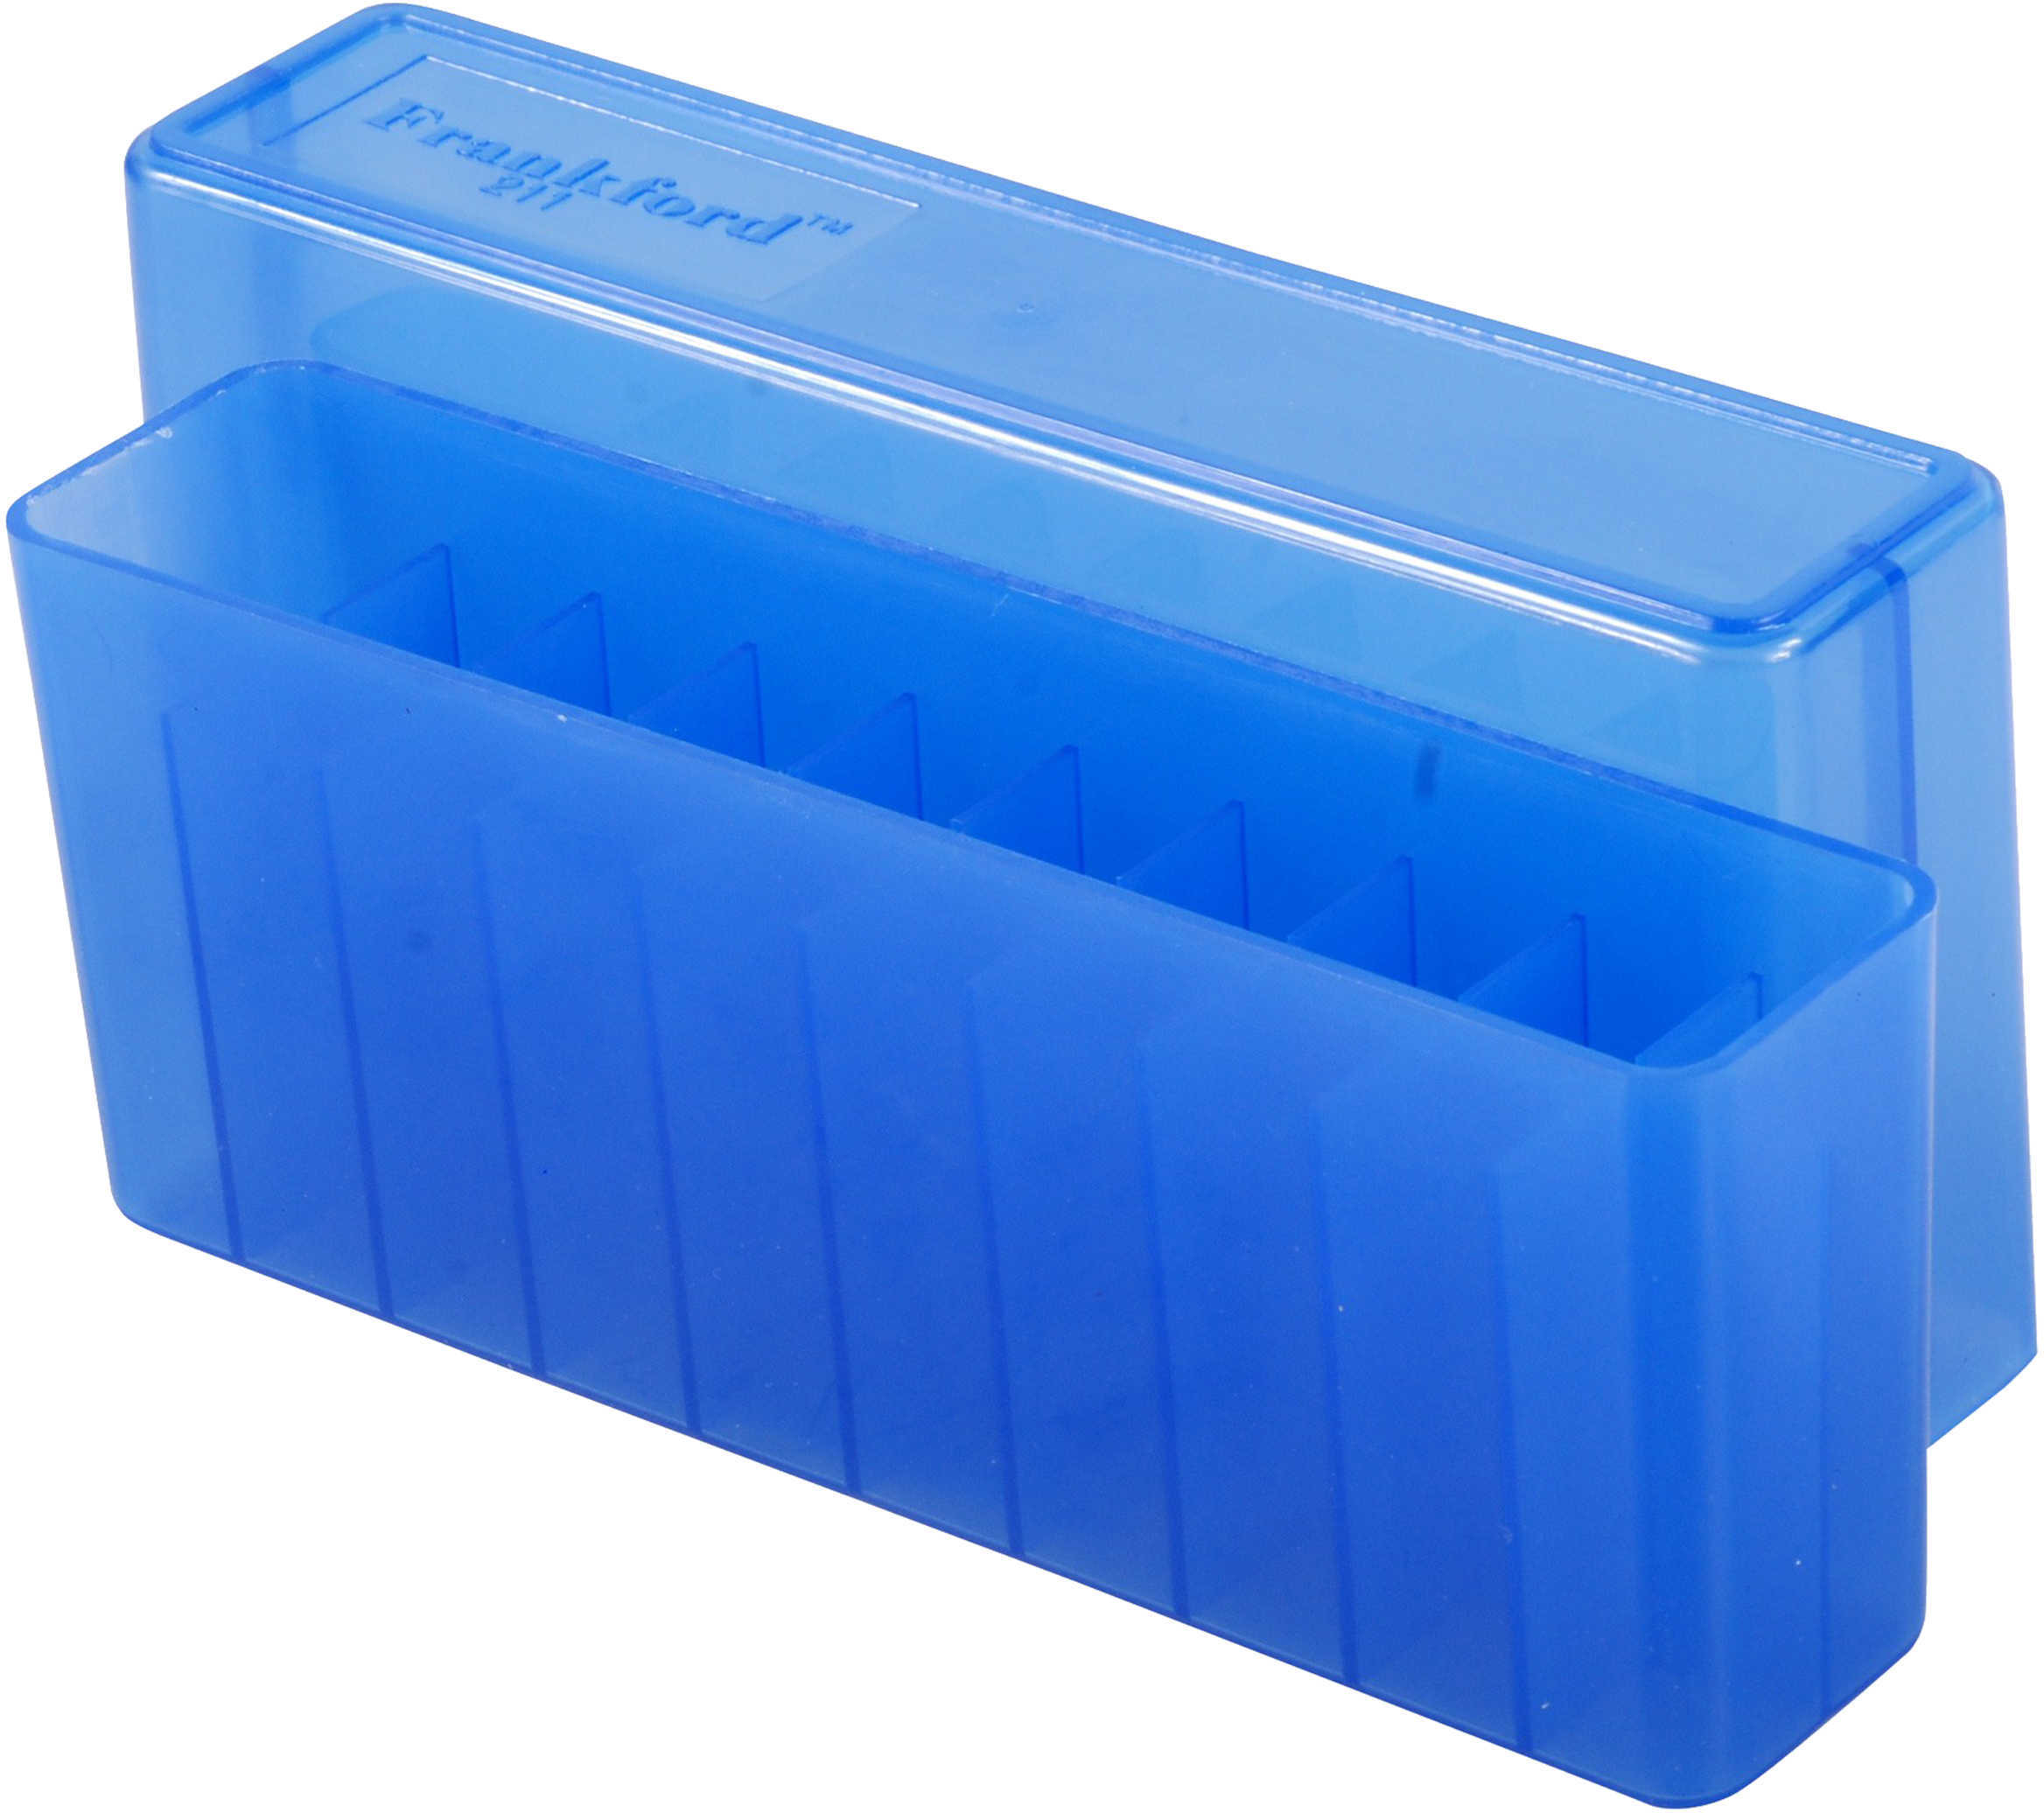 Frankford Arsenal Belted Mag 20 Count Ammunition Box, Blue 877991